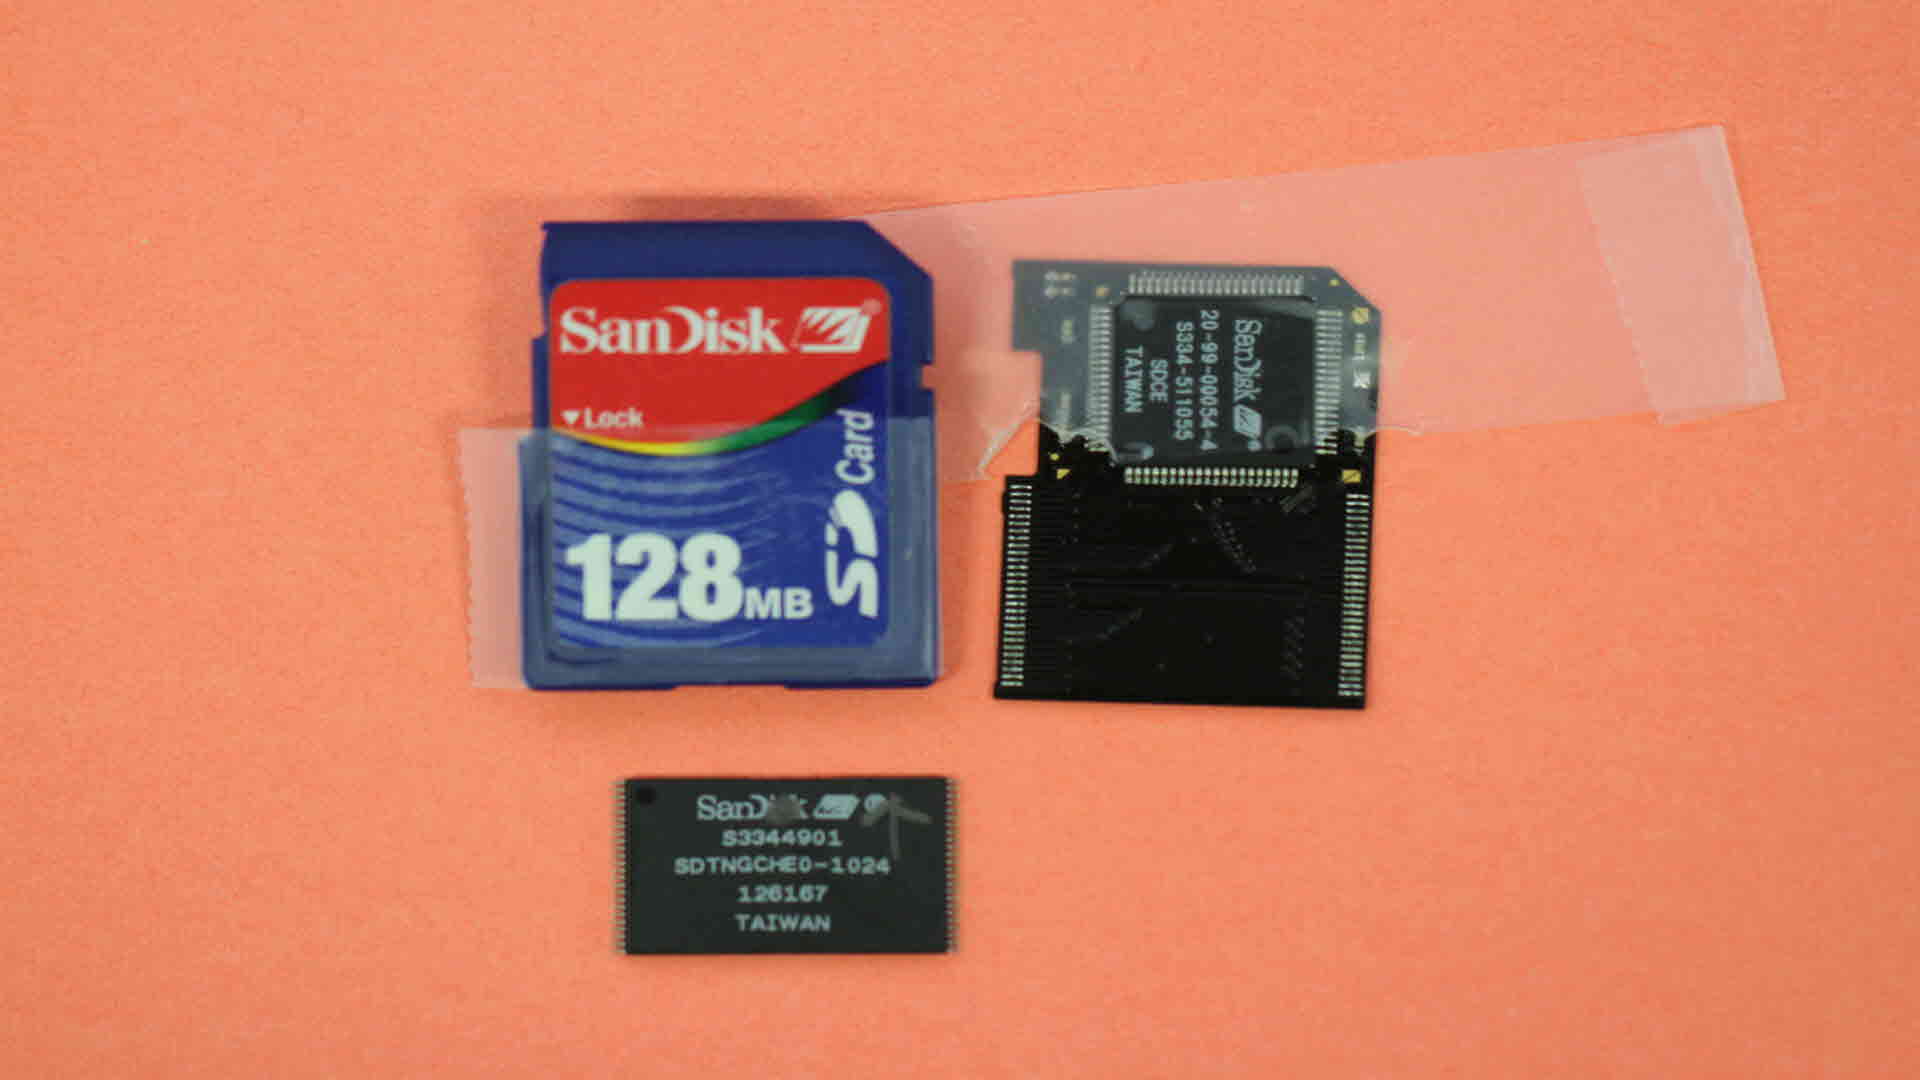 sandisk-128mb-sd-recovery